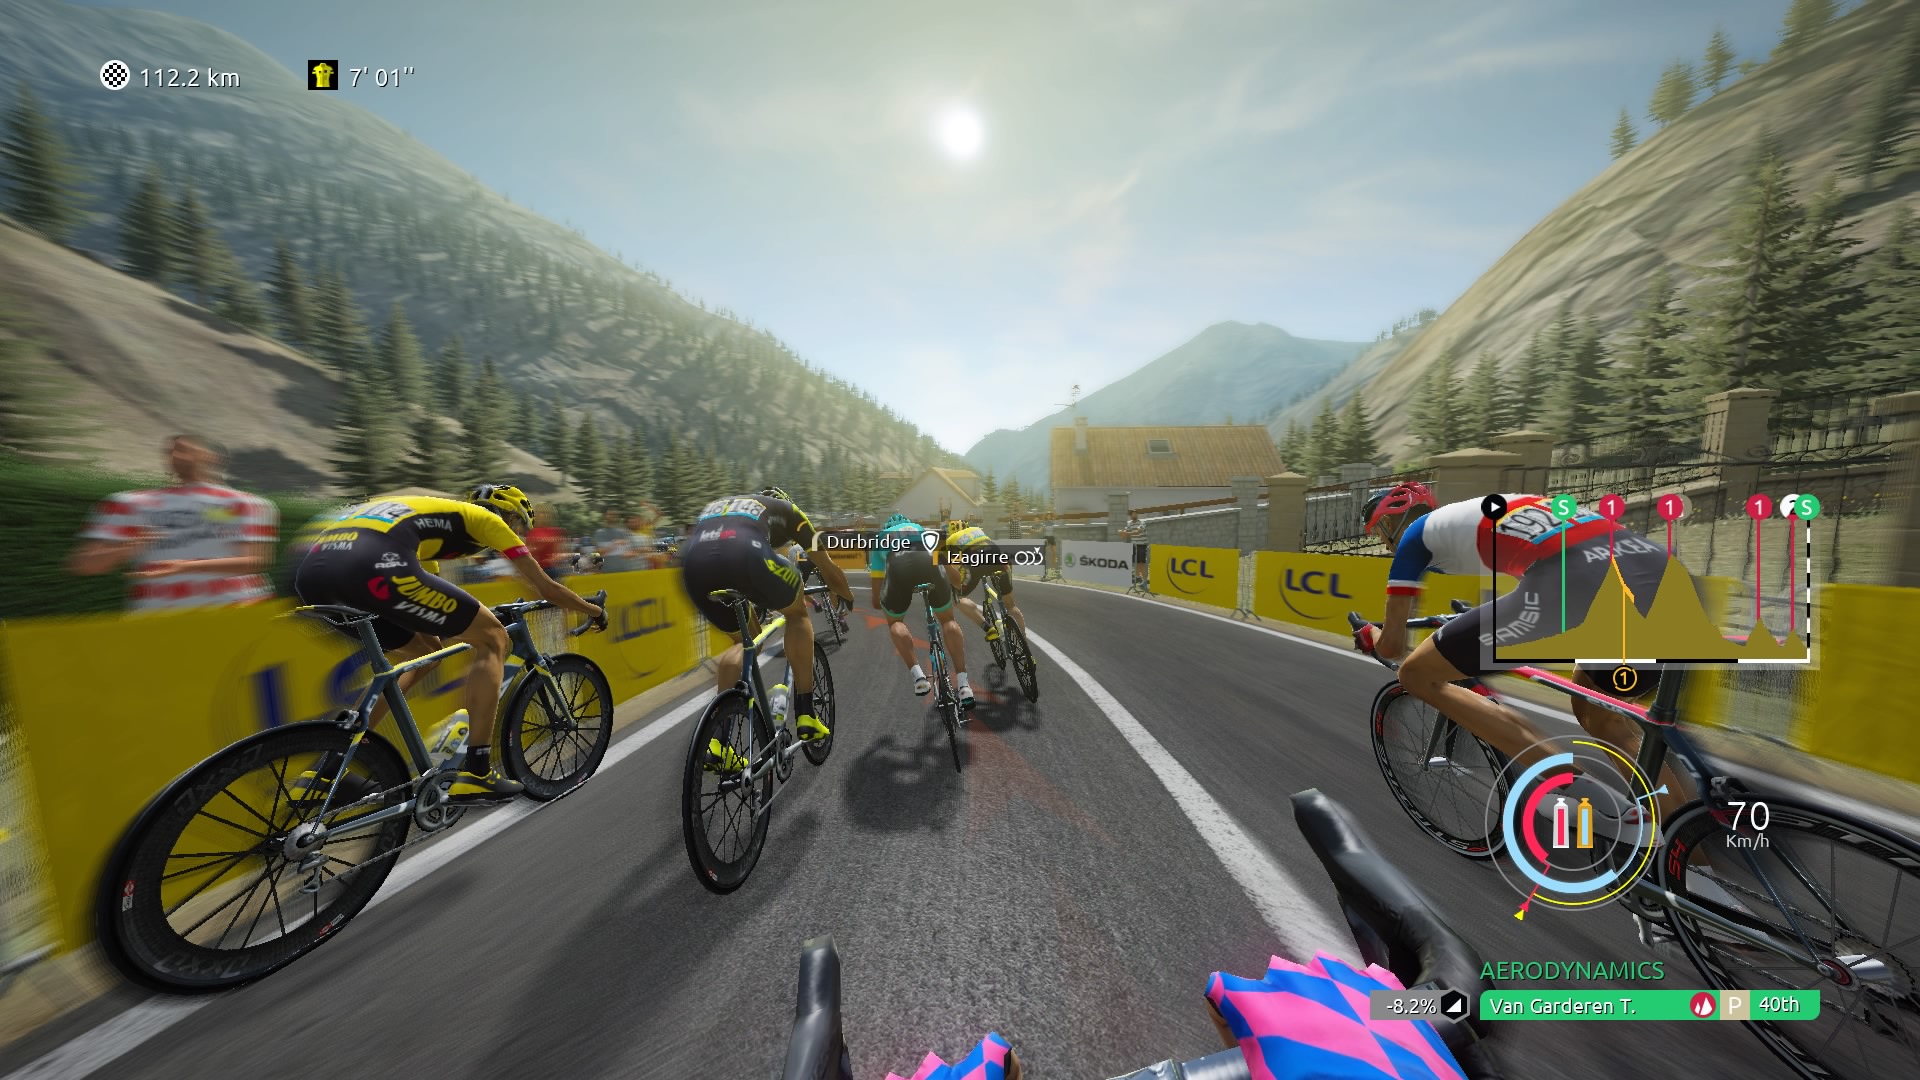 Tour de France Vs Pro Cycling Manager - Which is the best cycling game?